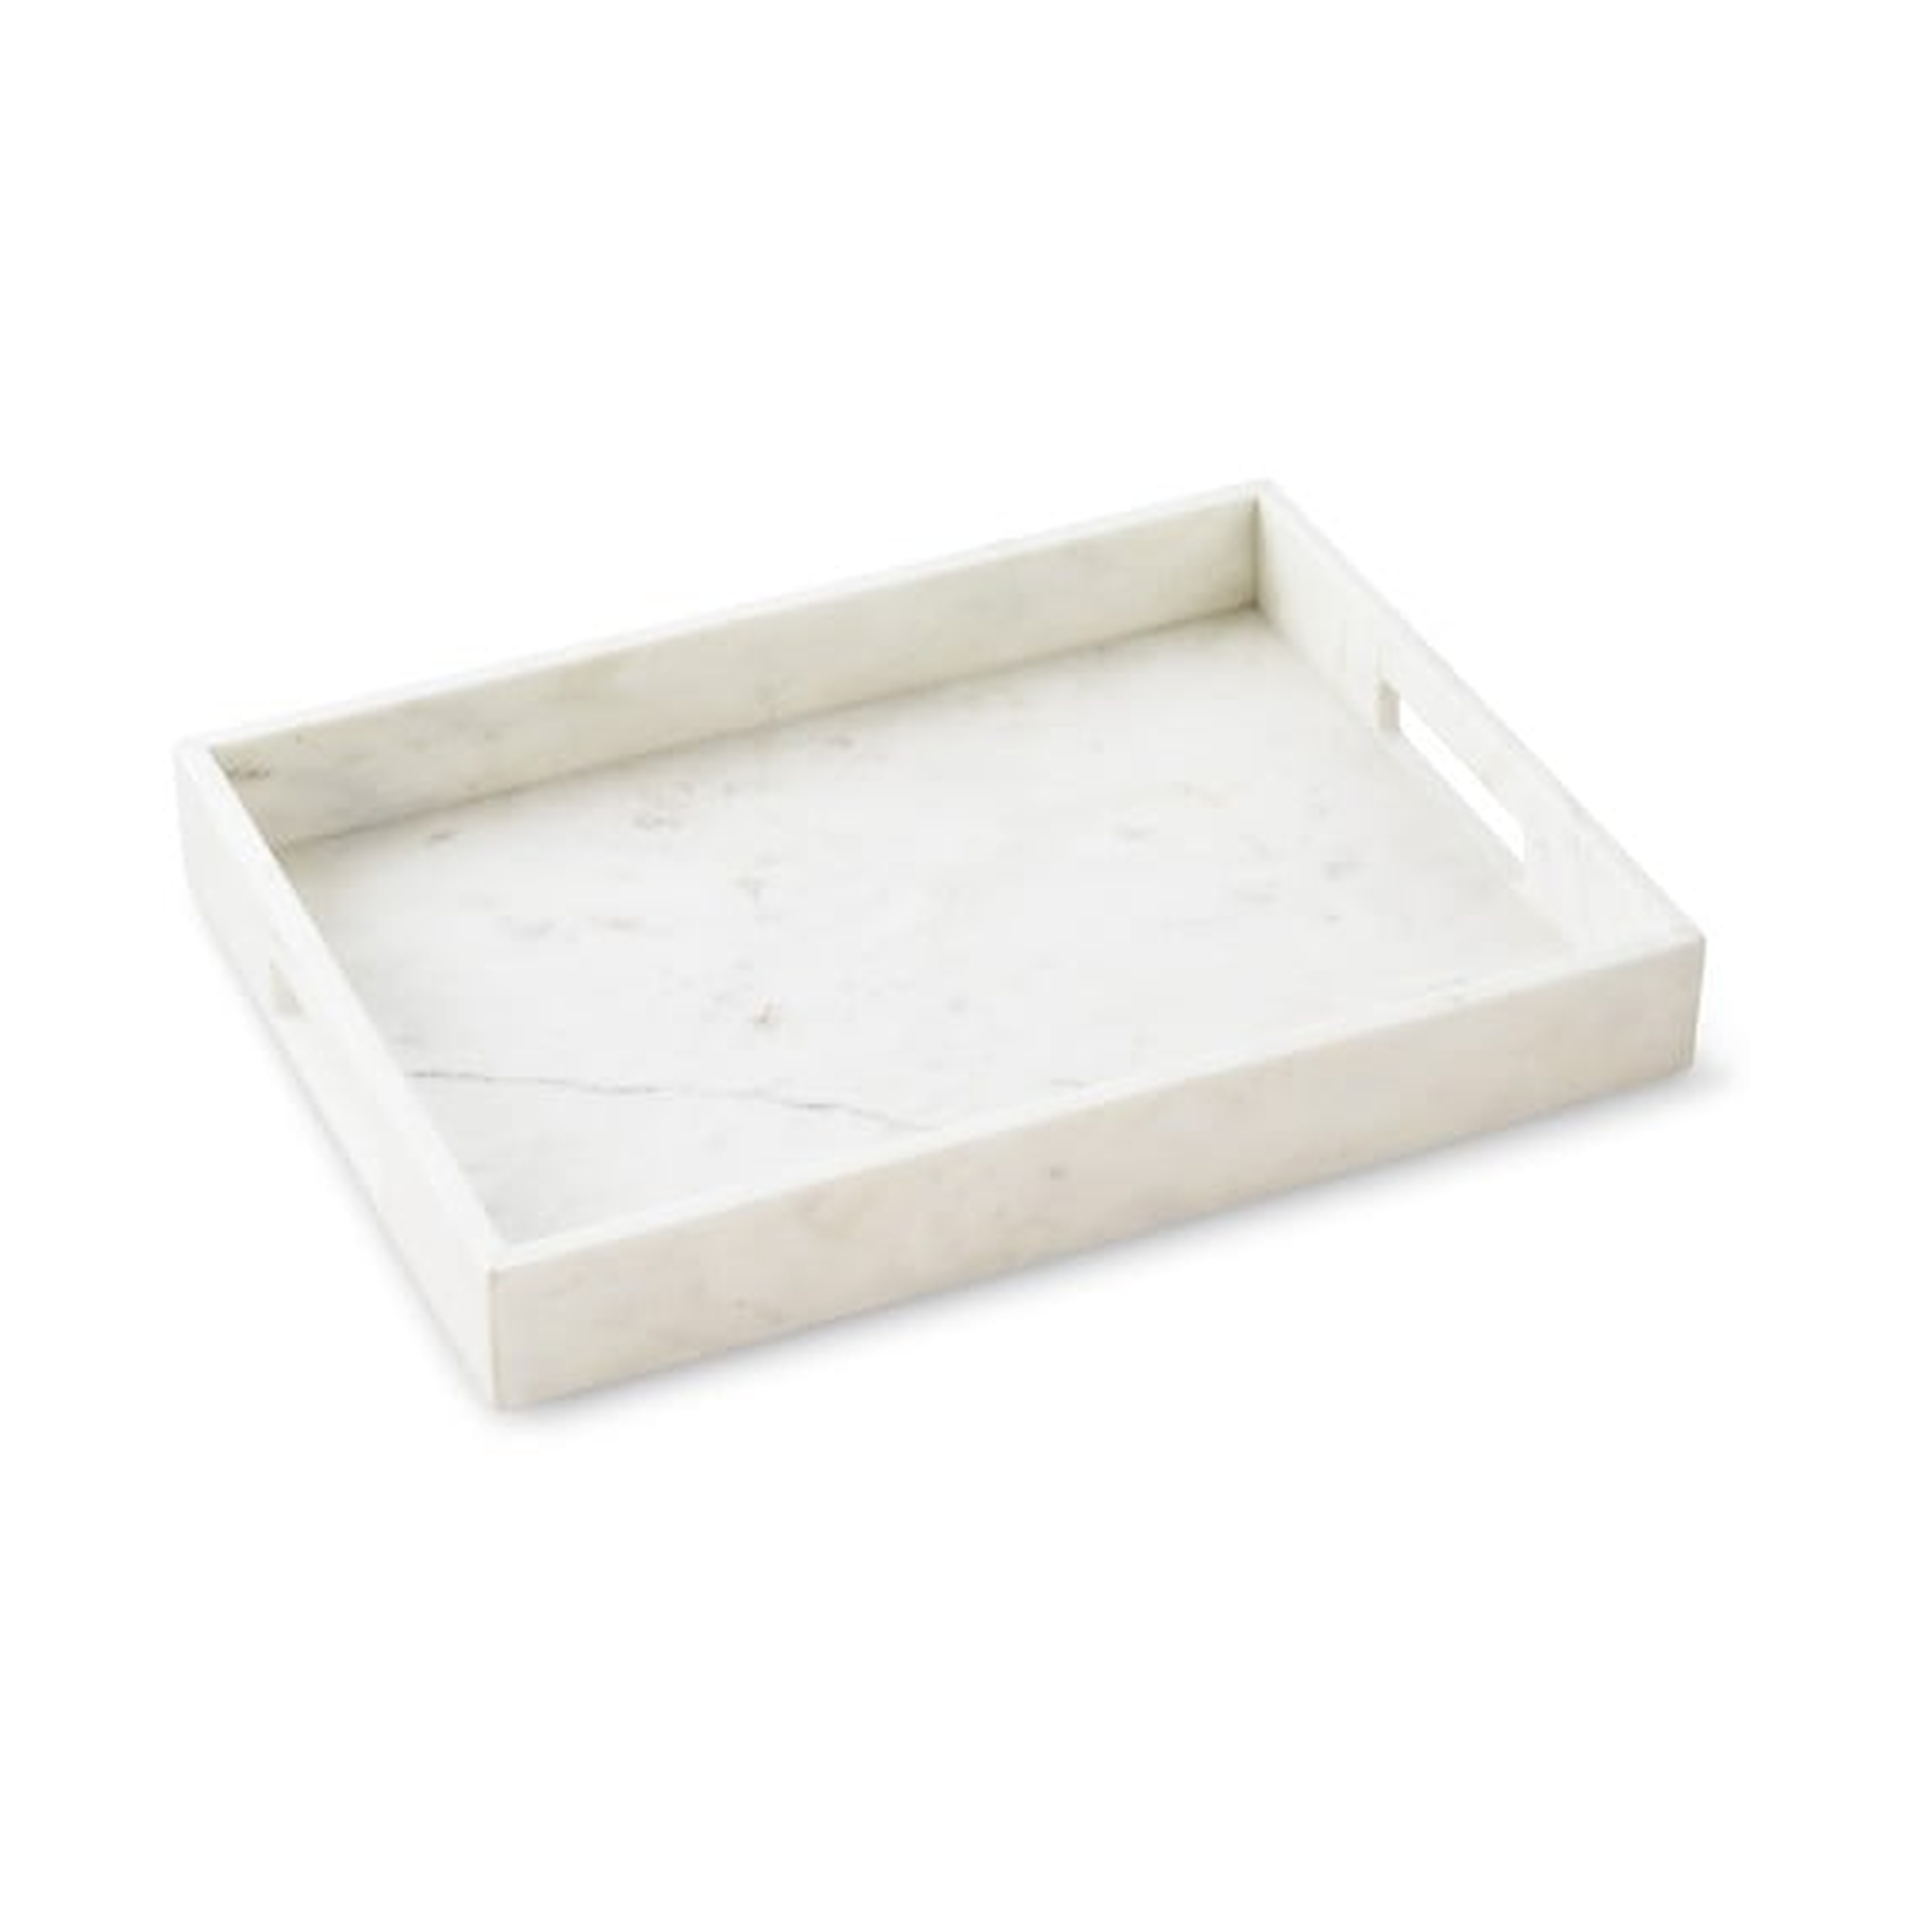 Marble Tray - Large - Williams Sonoma Home